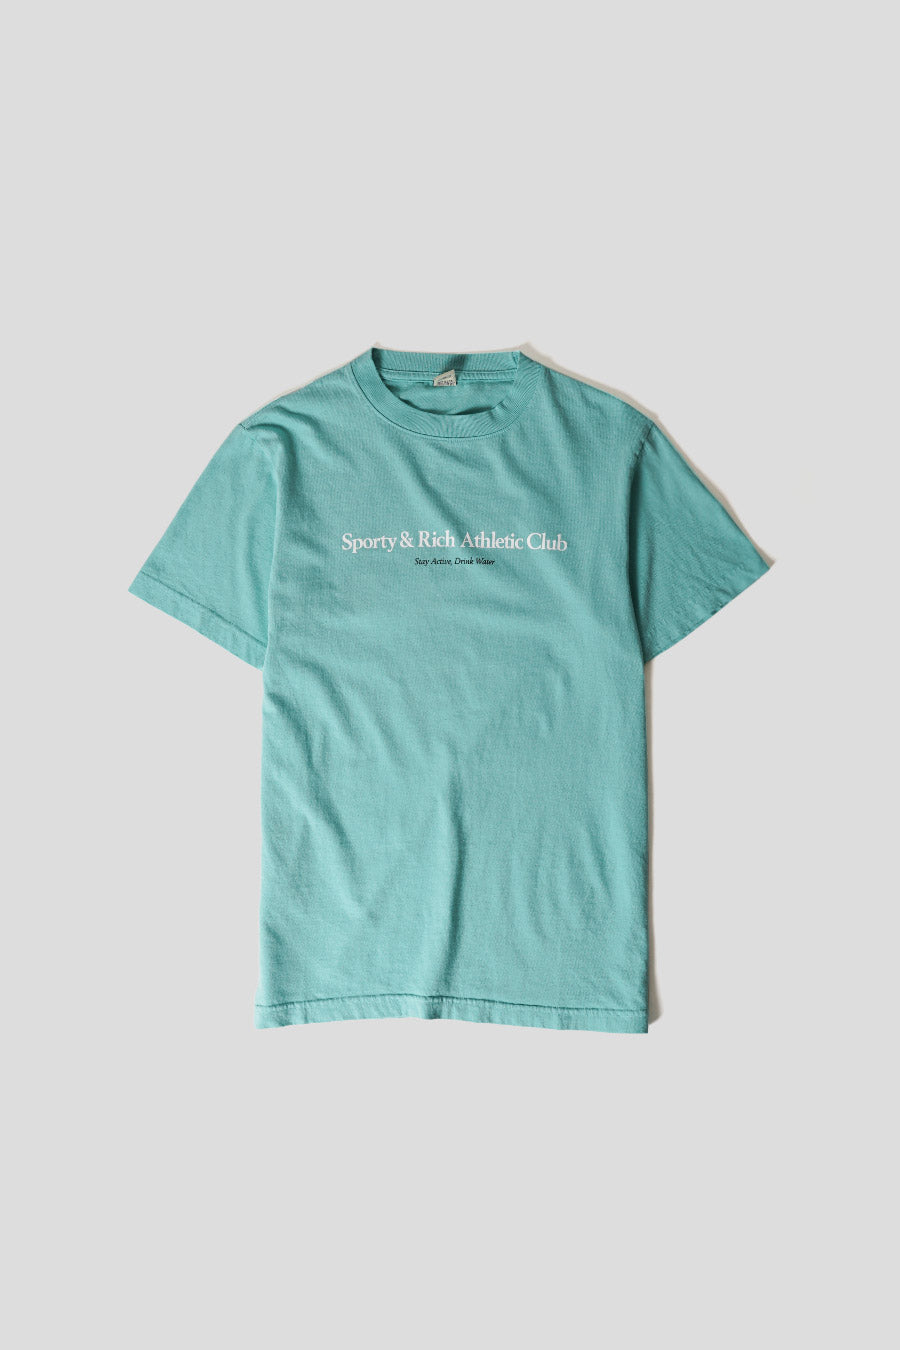 Sporty & Rich - T-SHIRT ATHLETIC CLUB TURQUOISE - LE LABO STORE